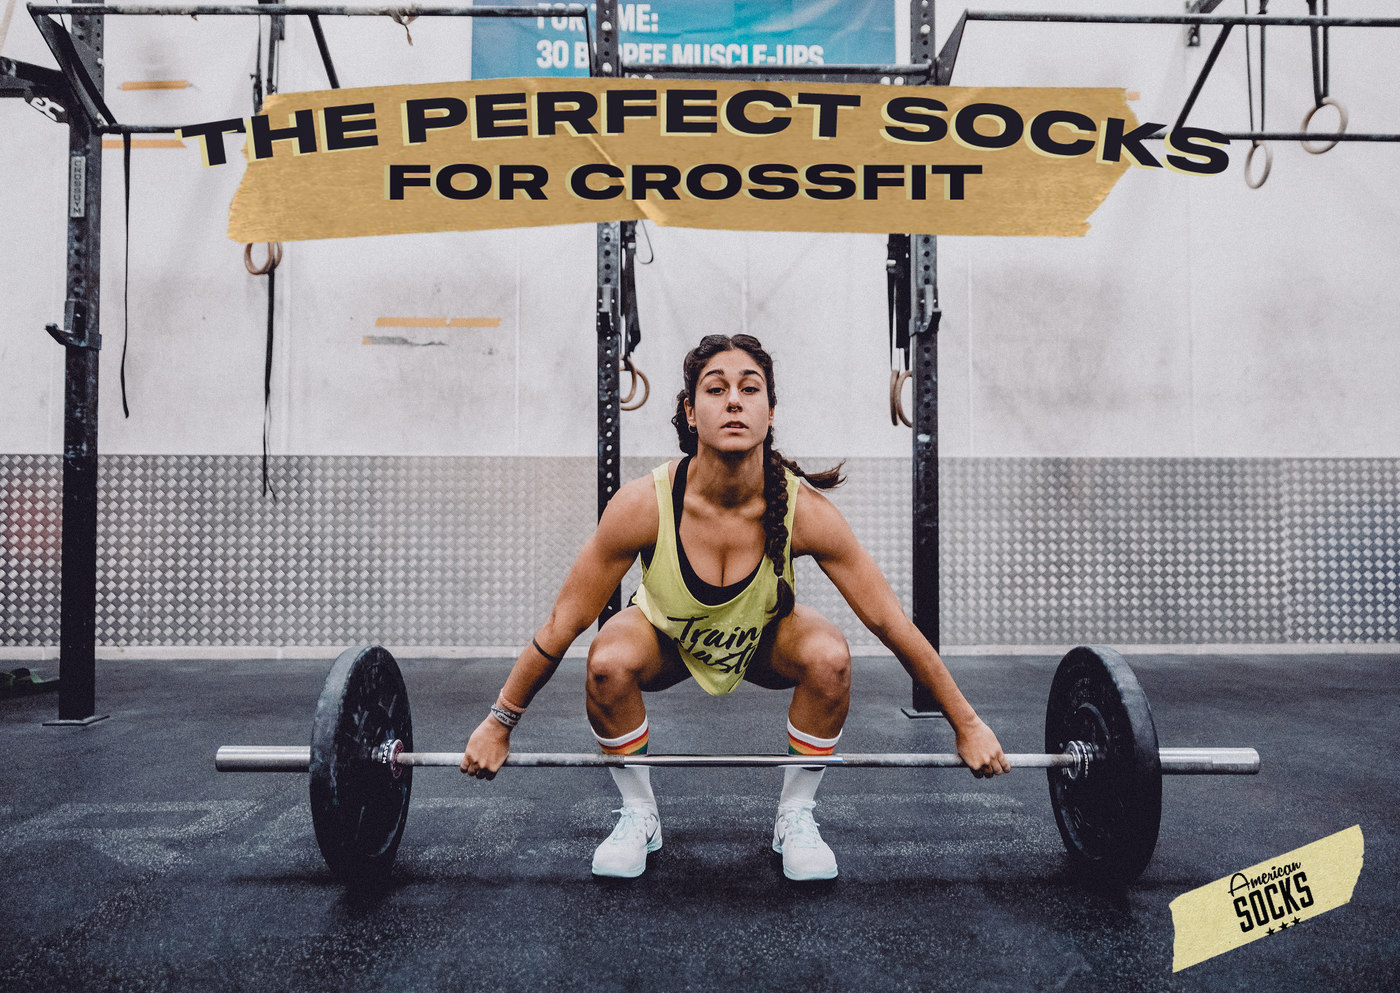 THE PERFECT SOCKS FOR CROSSFIT 🏋🏻‍♀️